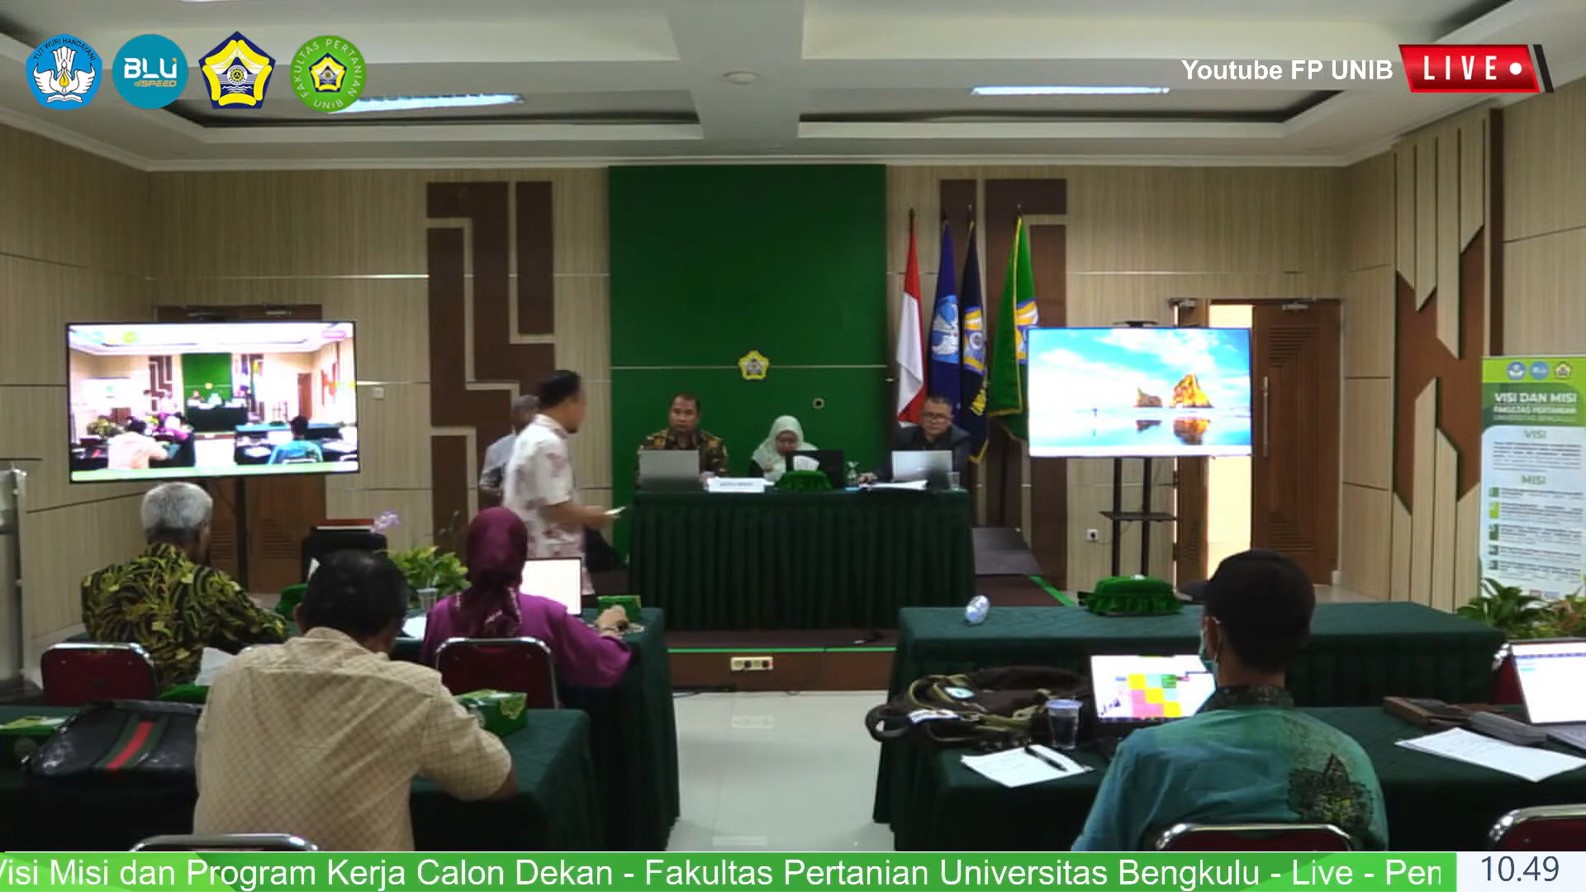 The Presentation of Strategic Programs by the Dean Candidates for the Faculty of Agriculture (FP)